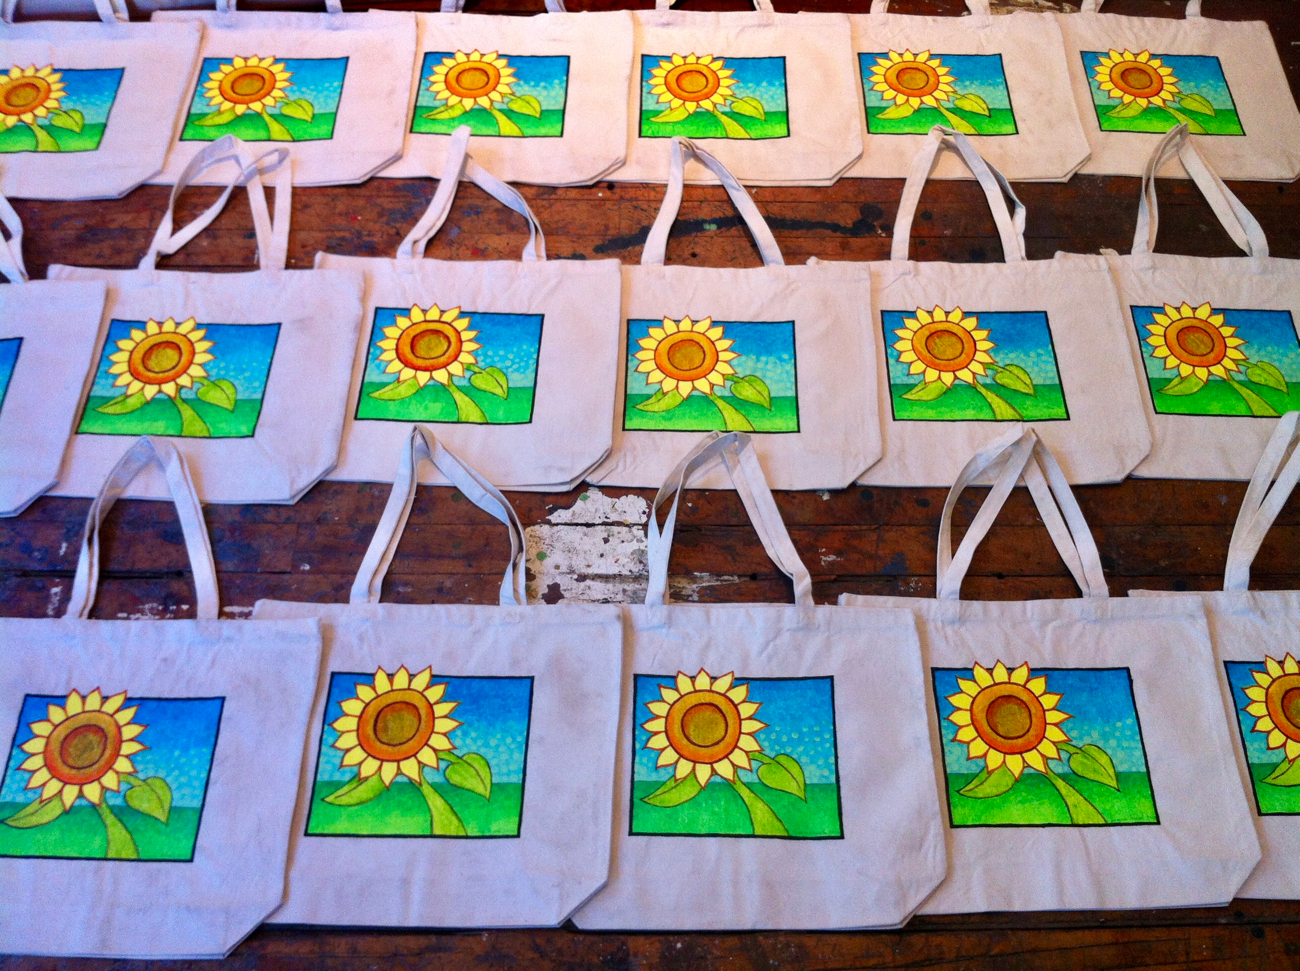 Sunflower Image on Bags